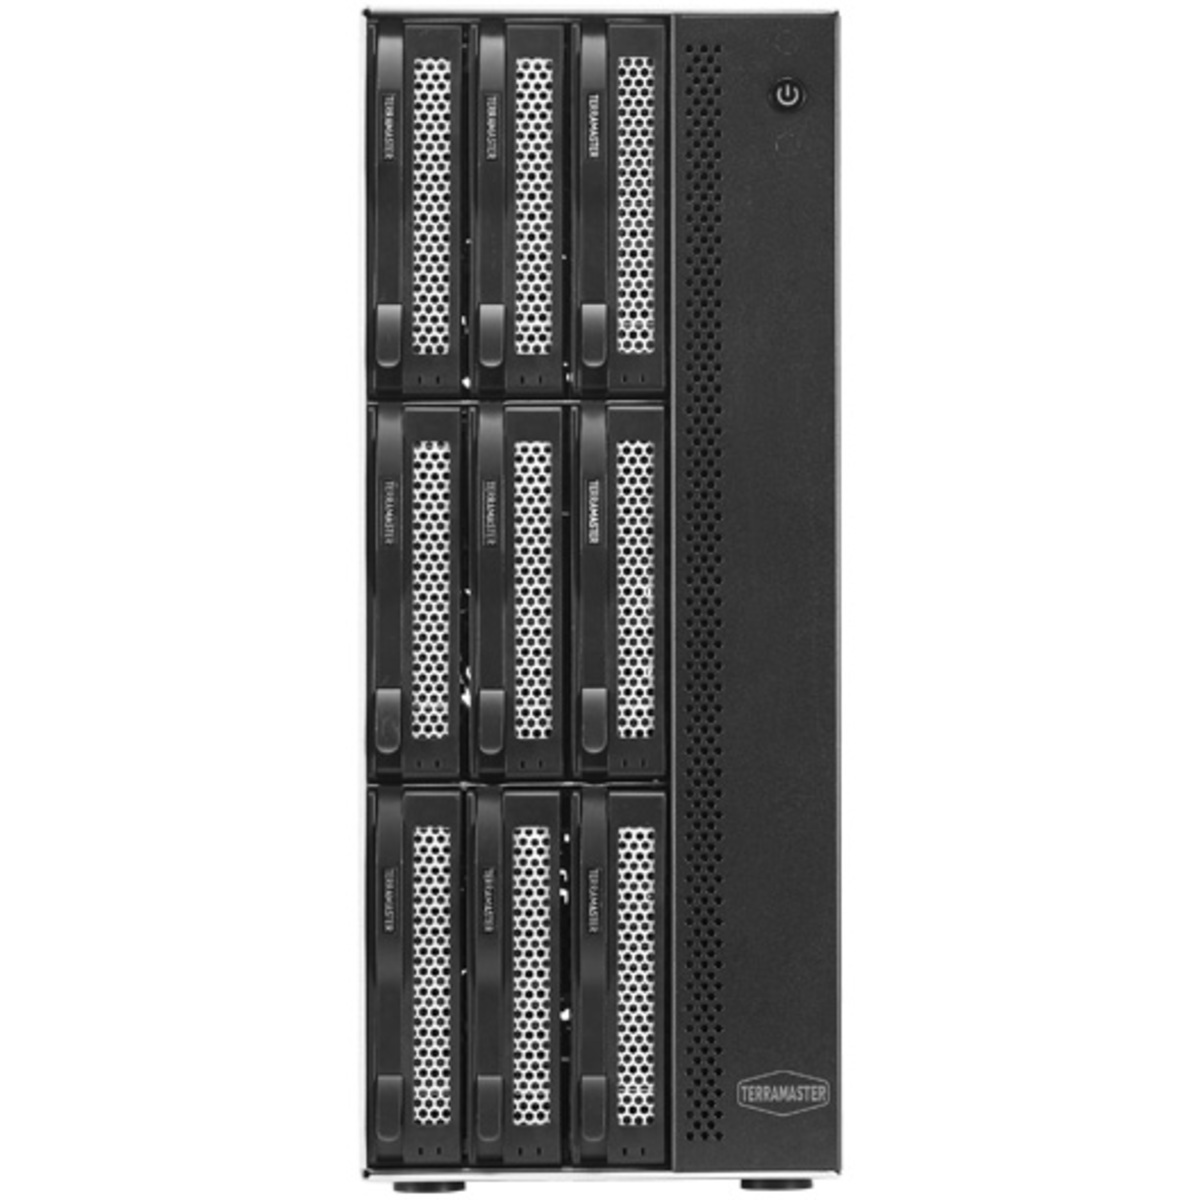 TerraMaster T9-450 84tb 9-Bay Desktop Multimedia / Power User / Business NAS - Network Attached Storage Device 7x12tb Toshiba Enterprise Capacity MG07ACA12TE 3.5 7200rpm SATA 6Gb/s HDD ENTERPRISE Class Drives Installed - Burn-In Tested T9-450